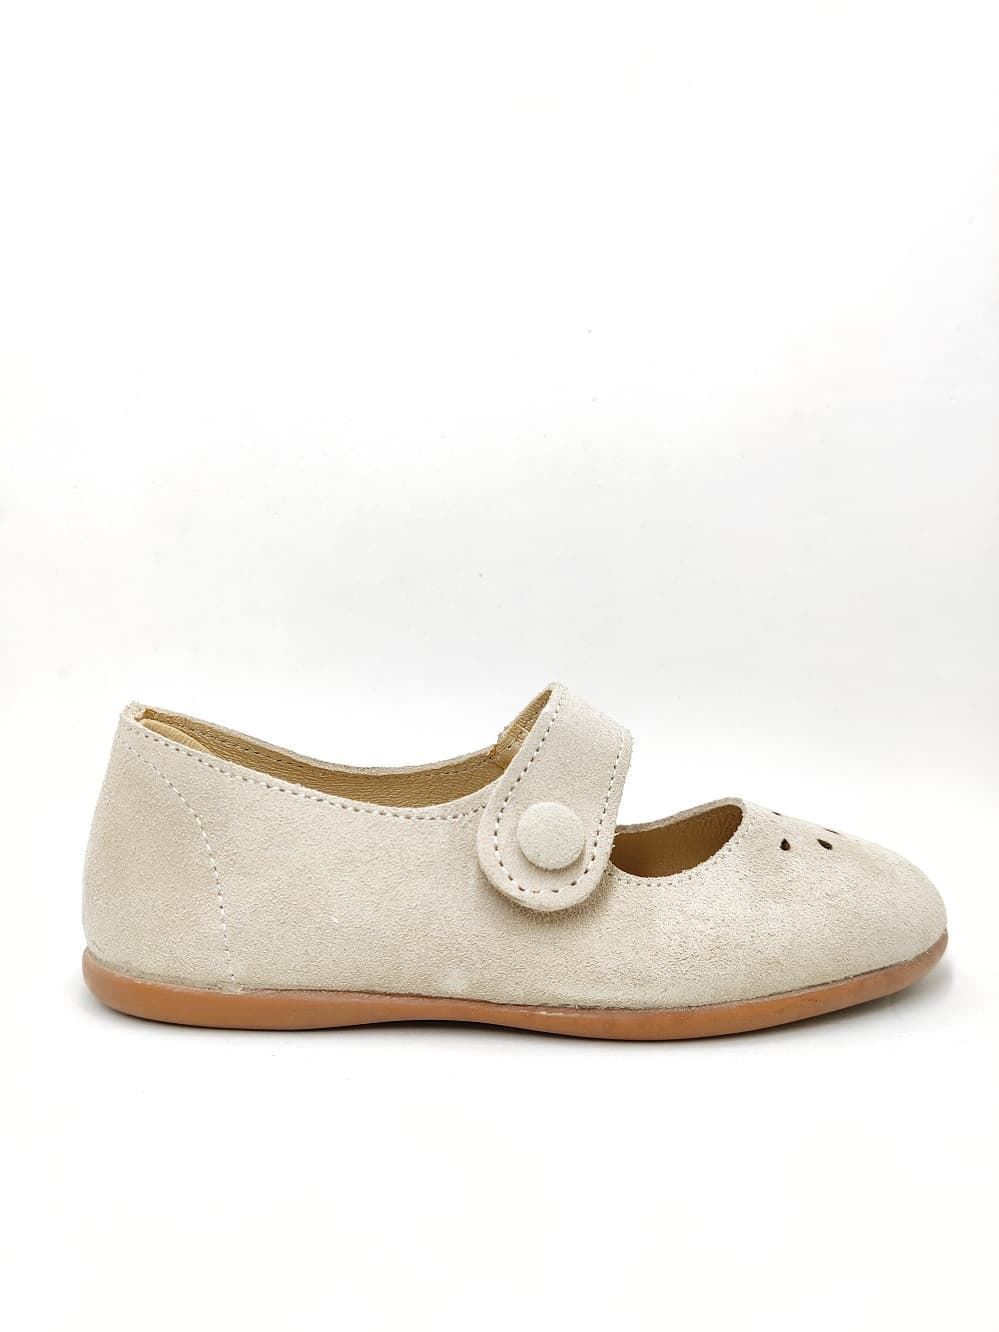 Merceditas sweets for girls in raw suede - Image 2